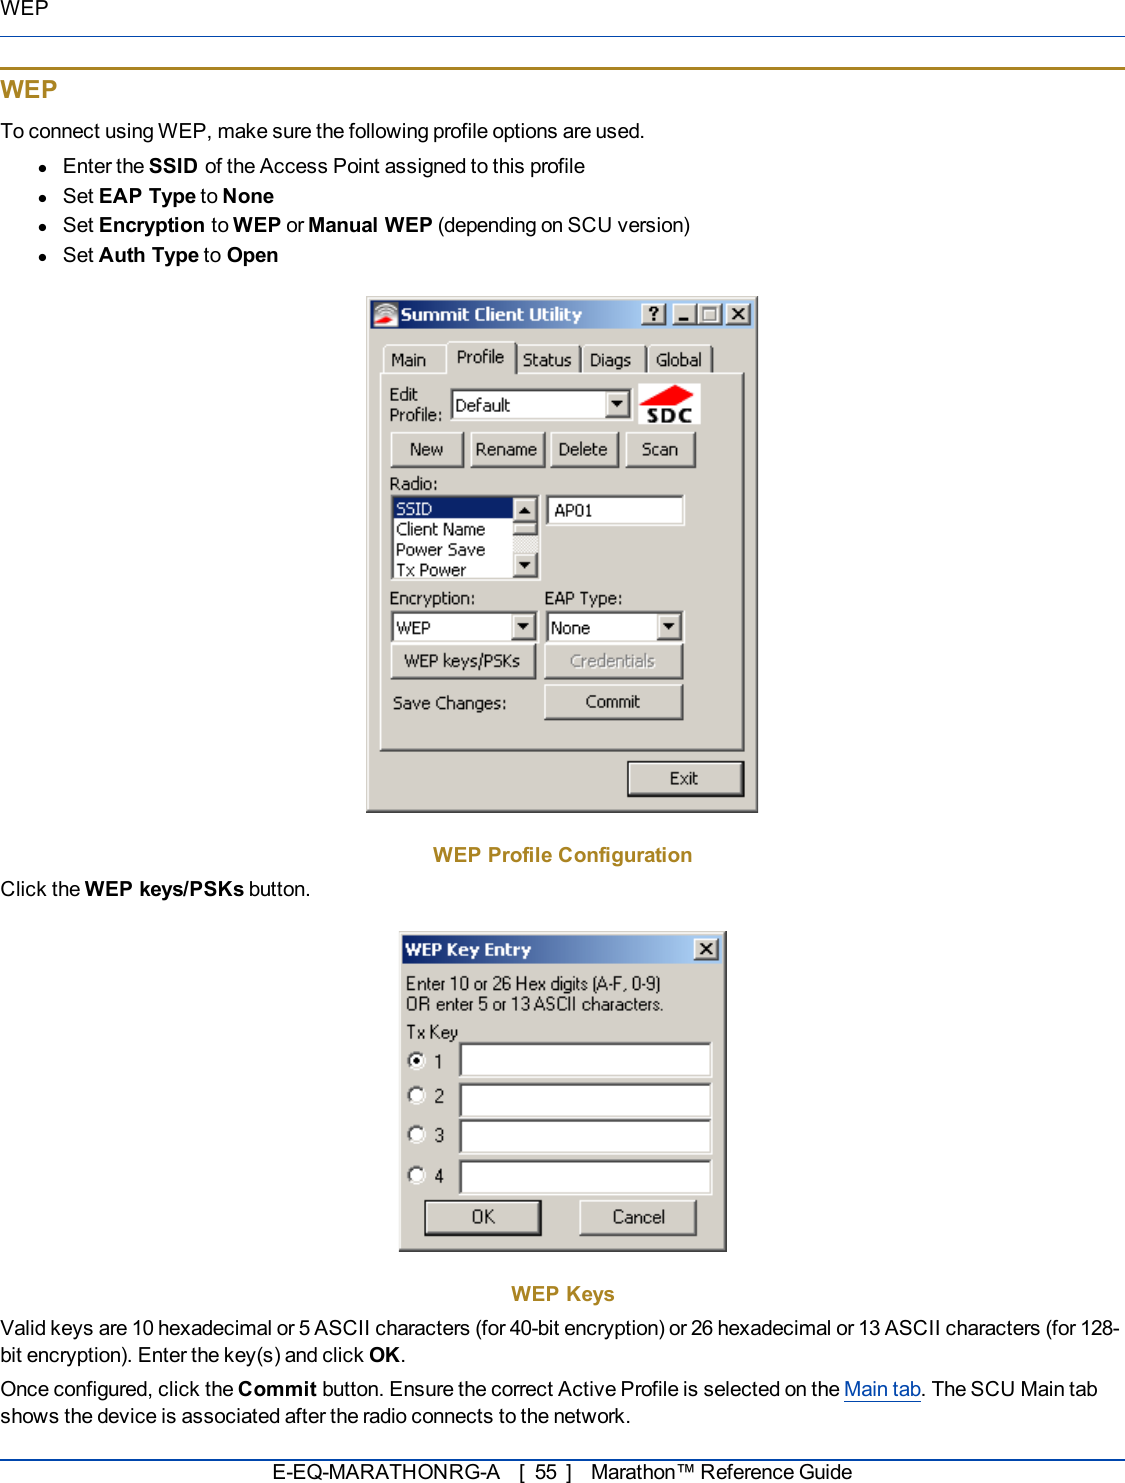 WEPWEPTo connect using WEP, make sure the following profile options are used.lEnter the SSID of the Access Point assigned to this profilelSet EAP Type to NonelSet Encryption to WEP or Manual WEP (depending on SCU version)lSet Auth Type to OpenWEP Profile ConfigurationClick the WEP keys/PSKs button.WEP KeysValid keys are 10 hexadecimal or 5 ASCIIcharacters (for 40-bit encryption)or 26 hexadecimal or 13 ASCII characters (for 128-bit encryption). Enter the key(s) and click OK.Once configured, click the Commit button. Ensure the correct Active Profile is selected on the Main tab. The SCU Main tabshows the device is associated after the radio connects to the network.E-EQ-MARATHONRG-A [ 55 ] Marathon™ Reference Guide